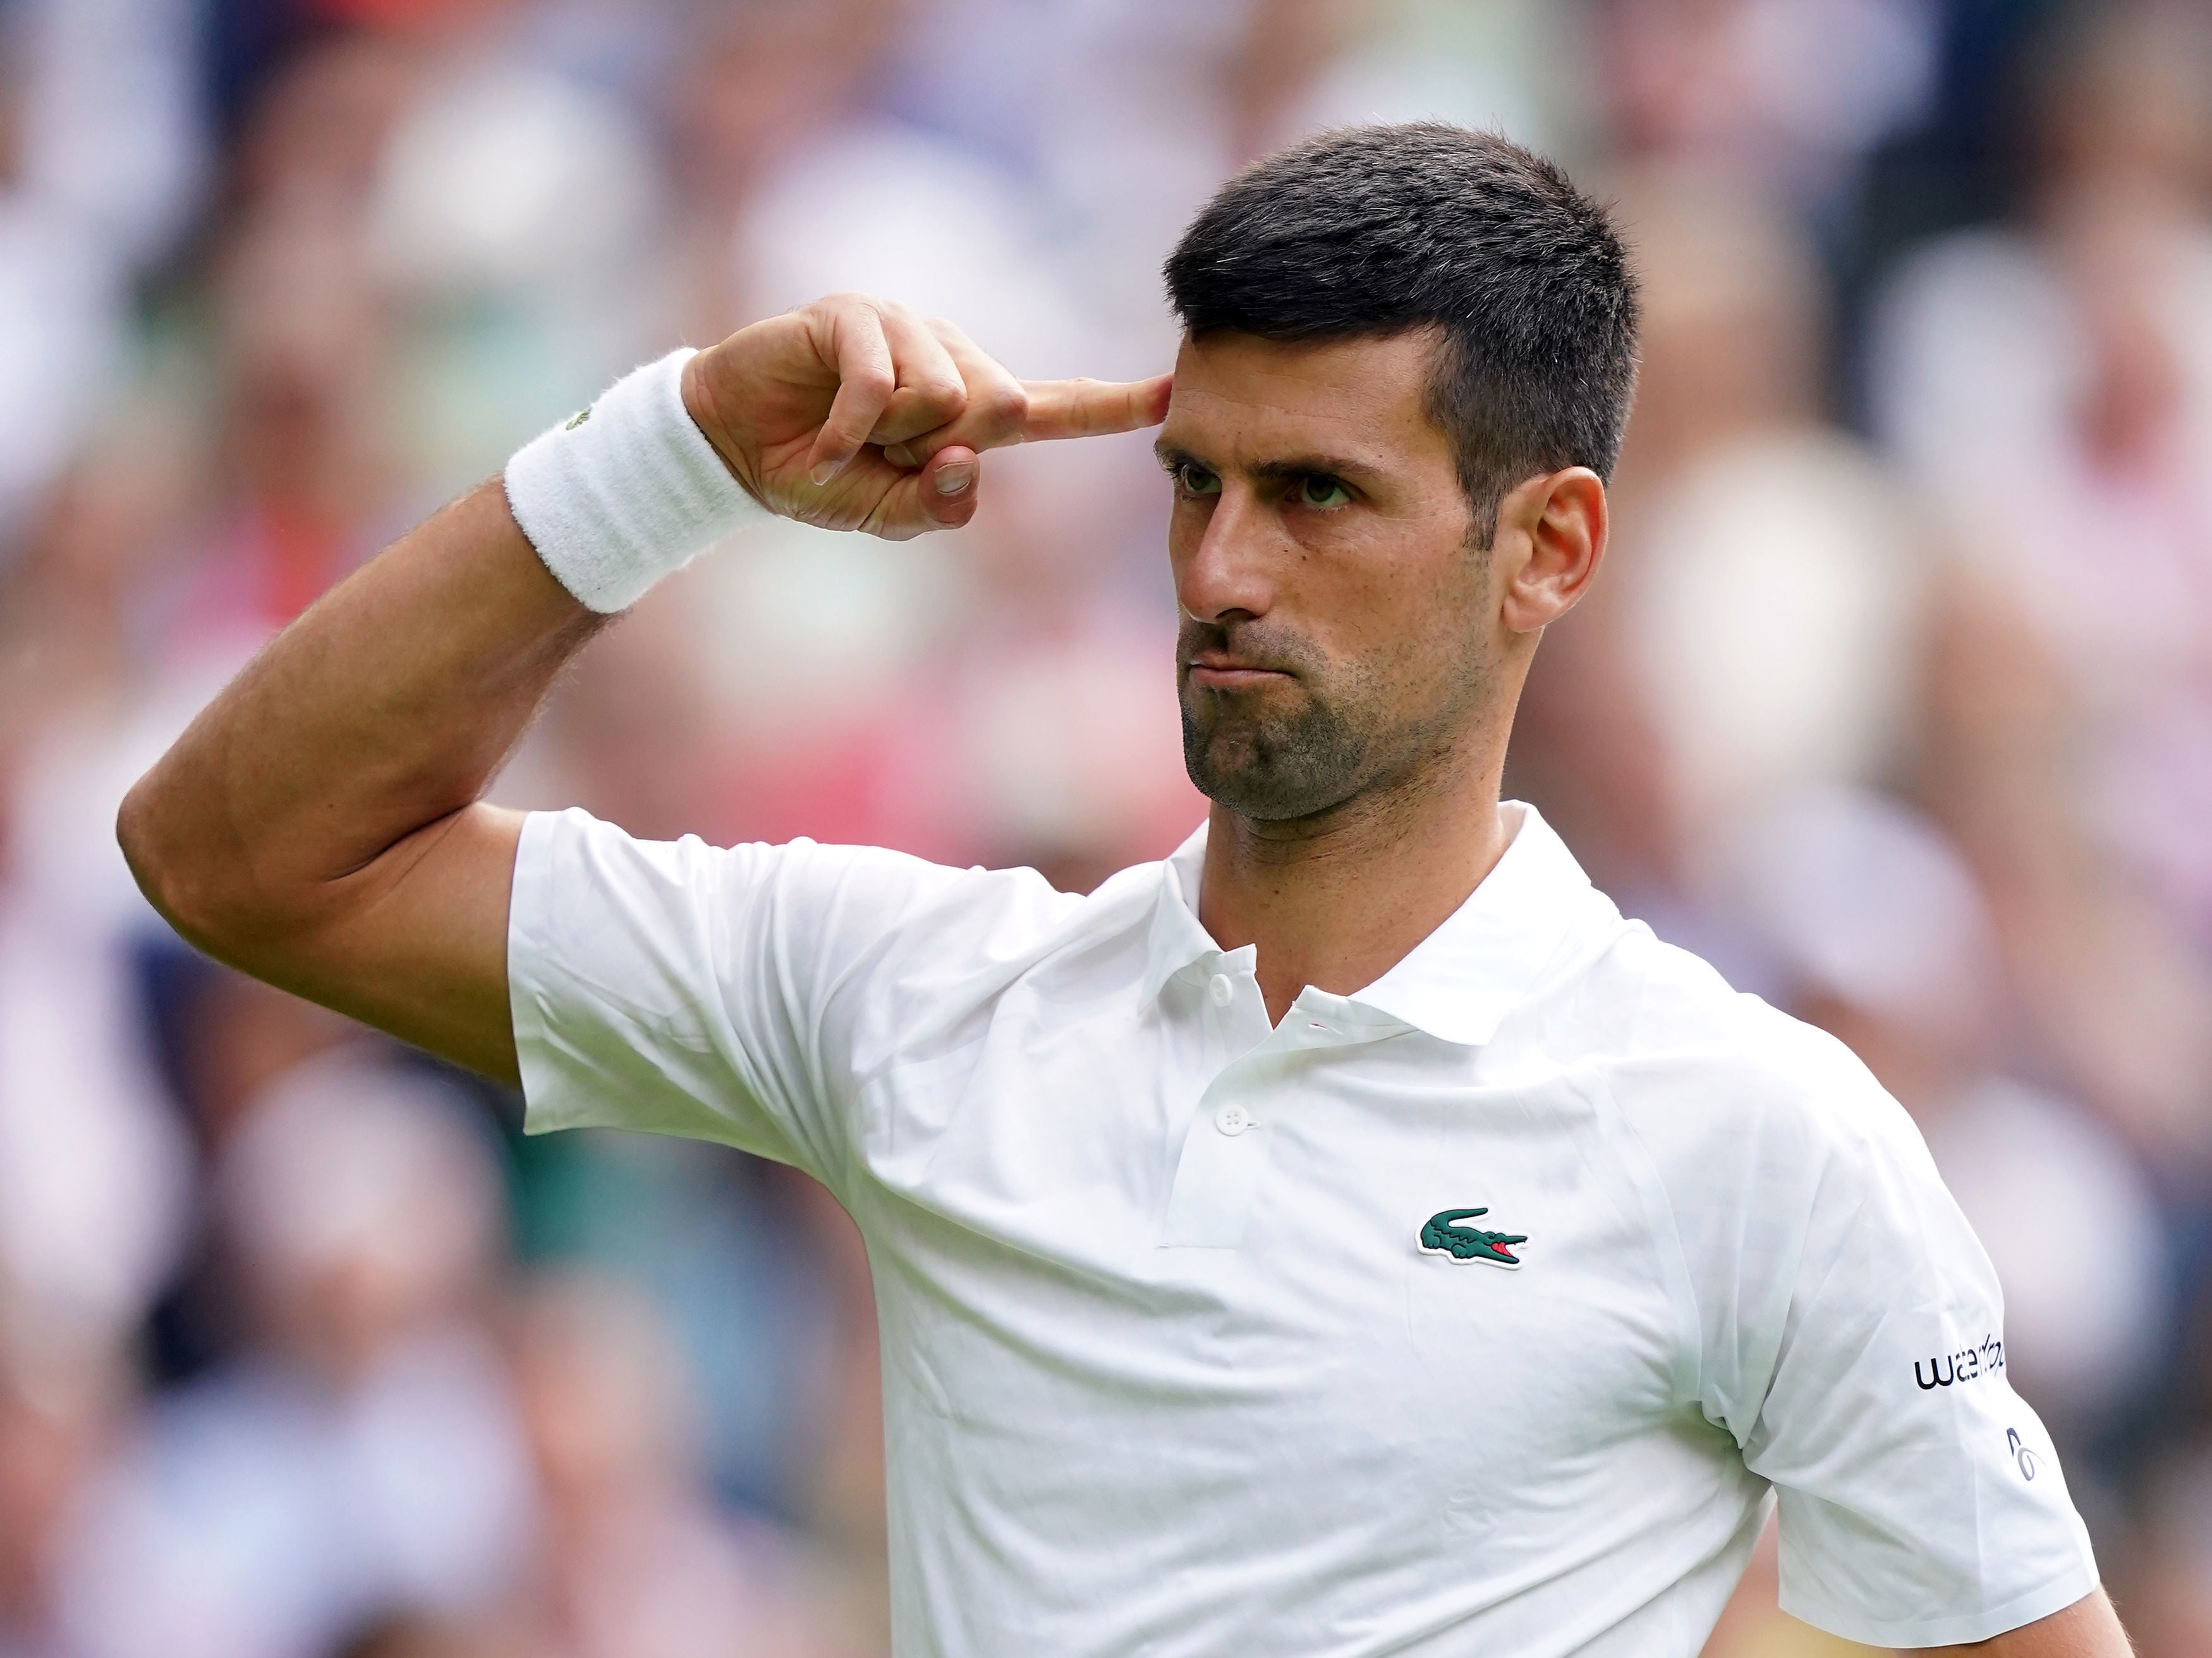 Novak Djokovics two sides show how Wimbledon champion has achieved perfection on grass The Independent